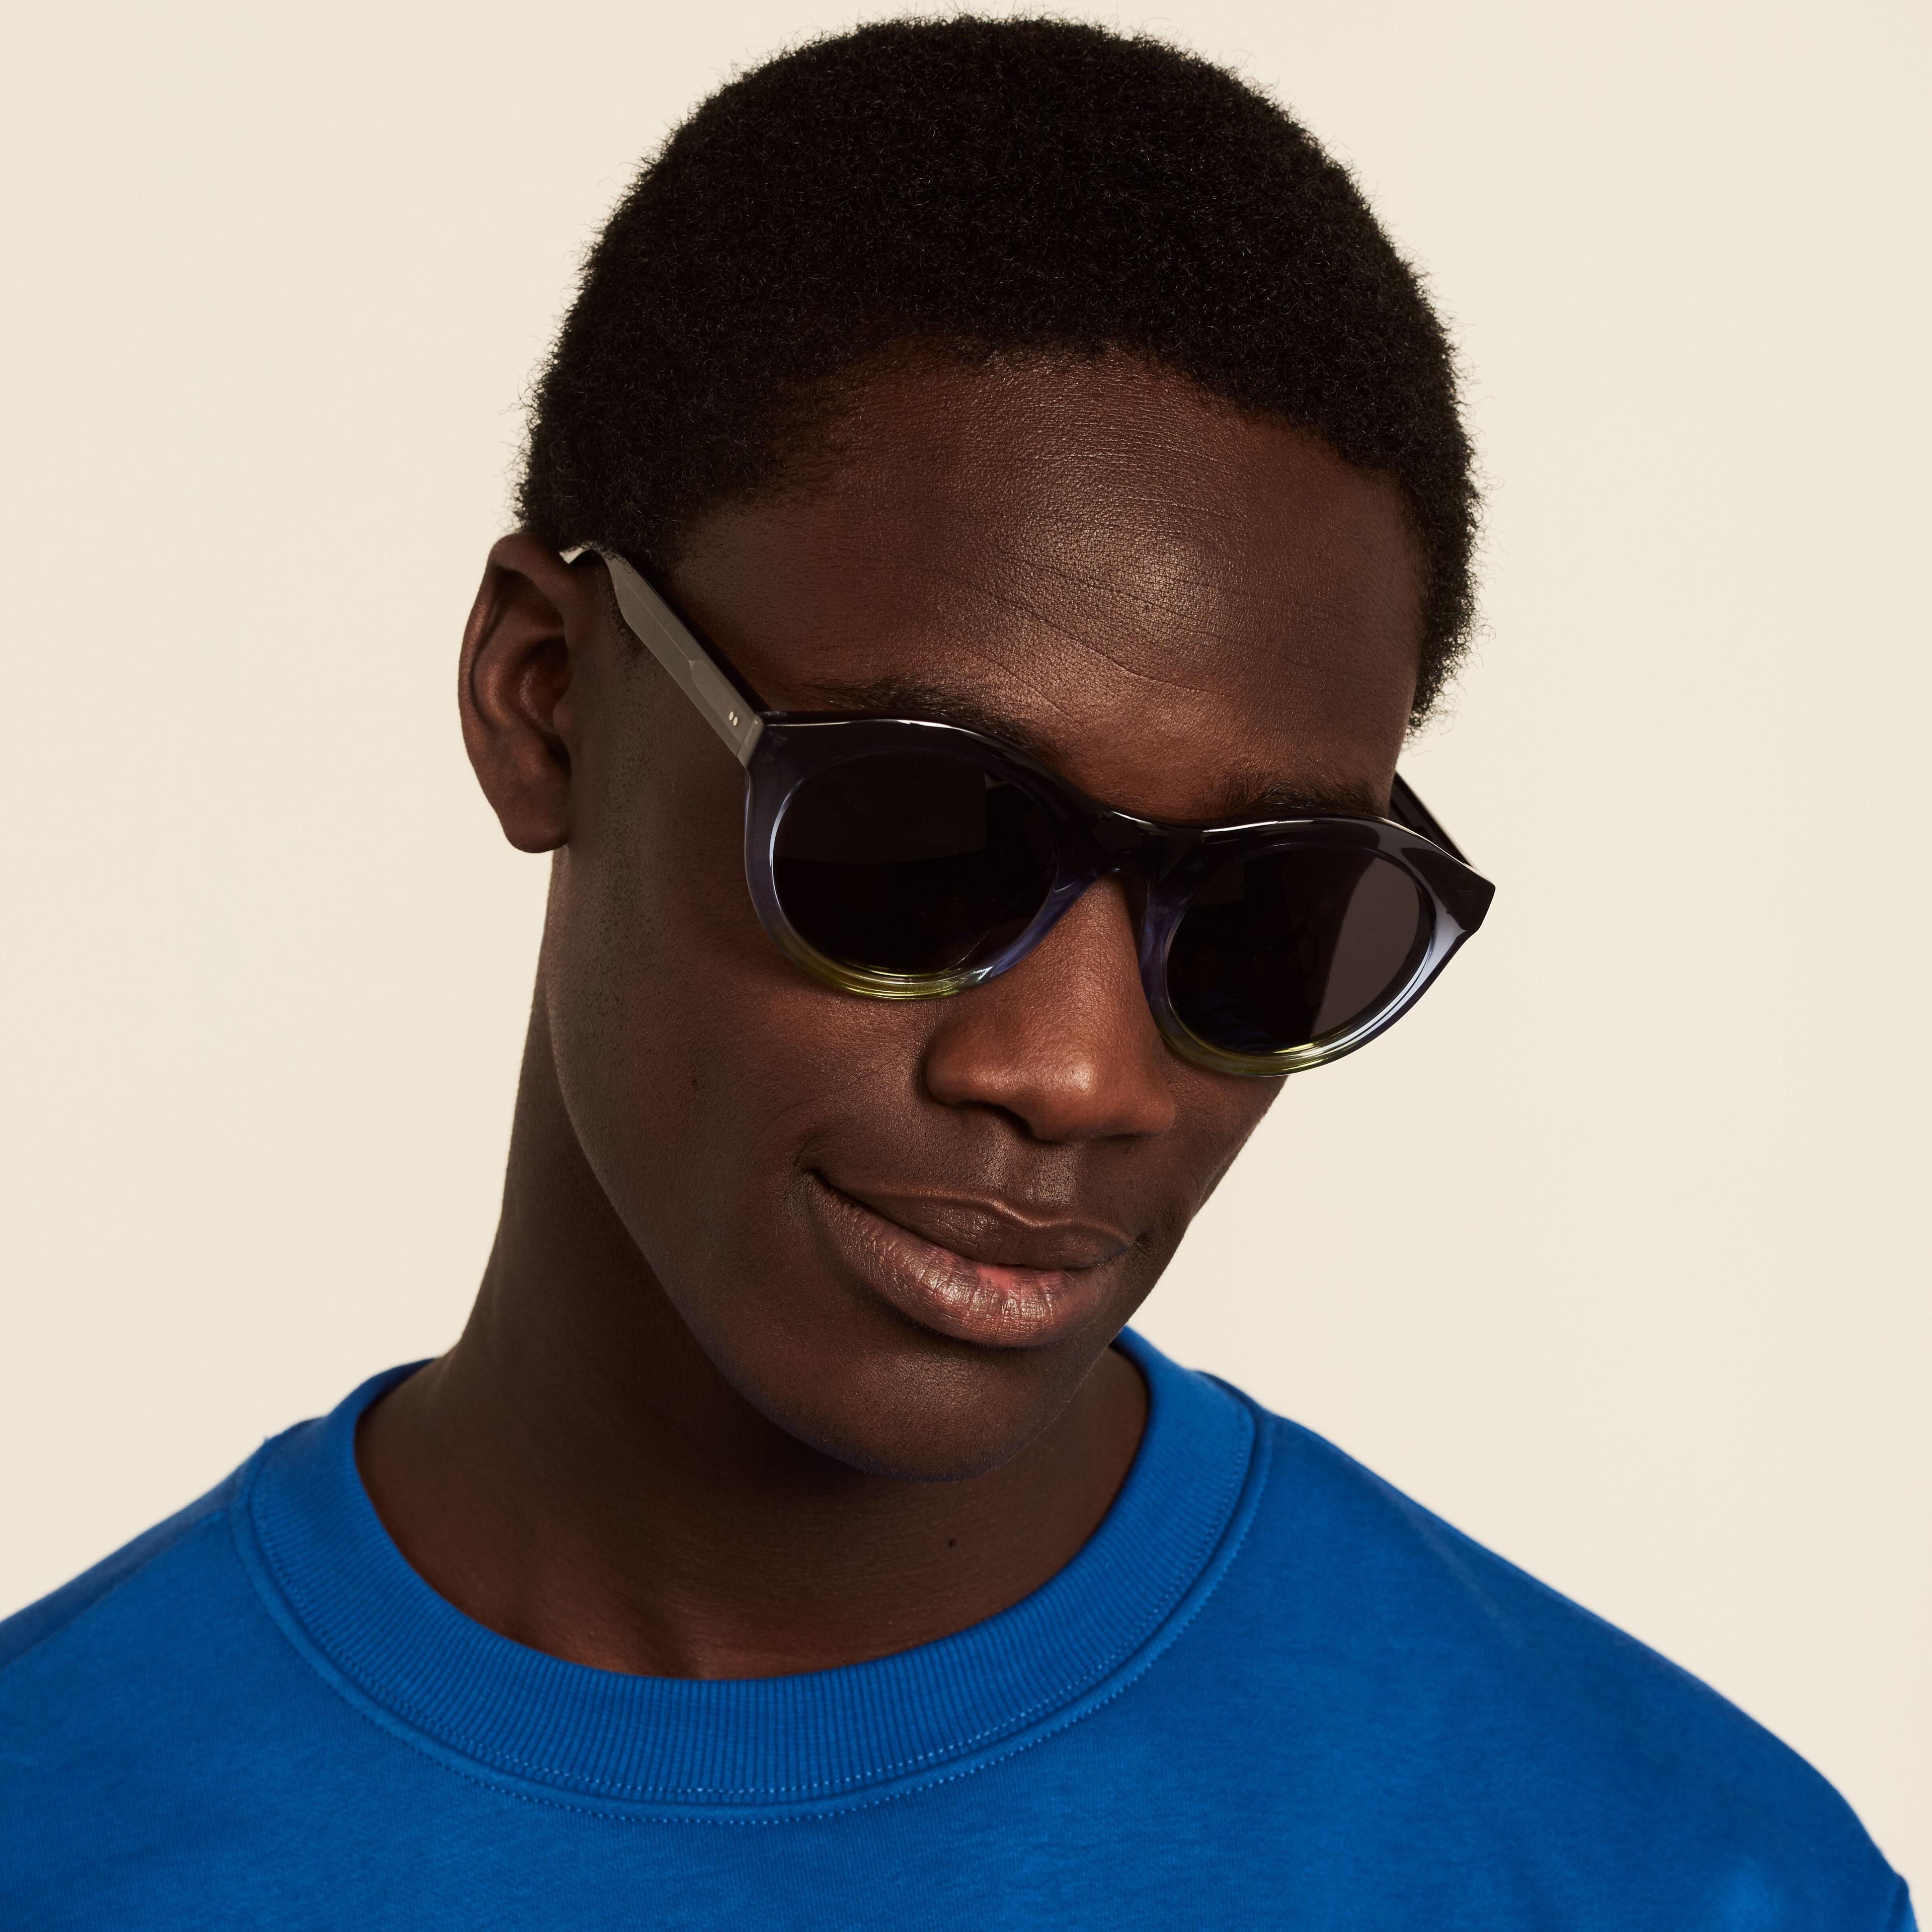 Ace & Tate Sunglasses | Round Acetate in Blue, Yellow